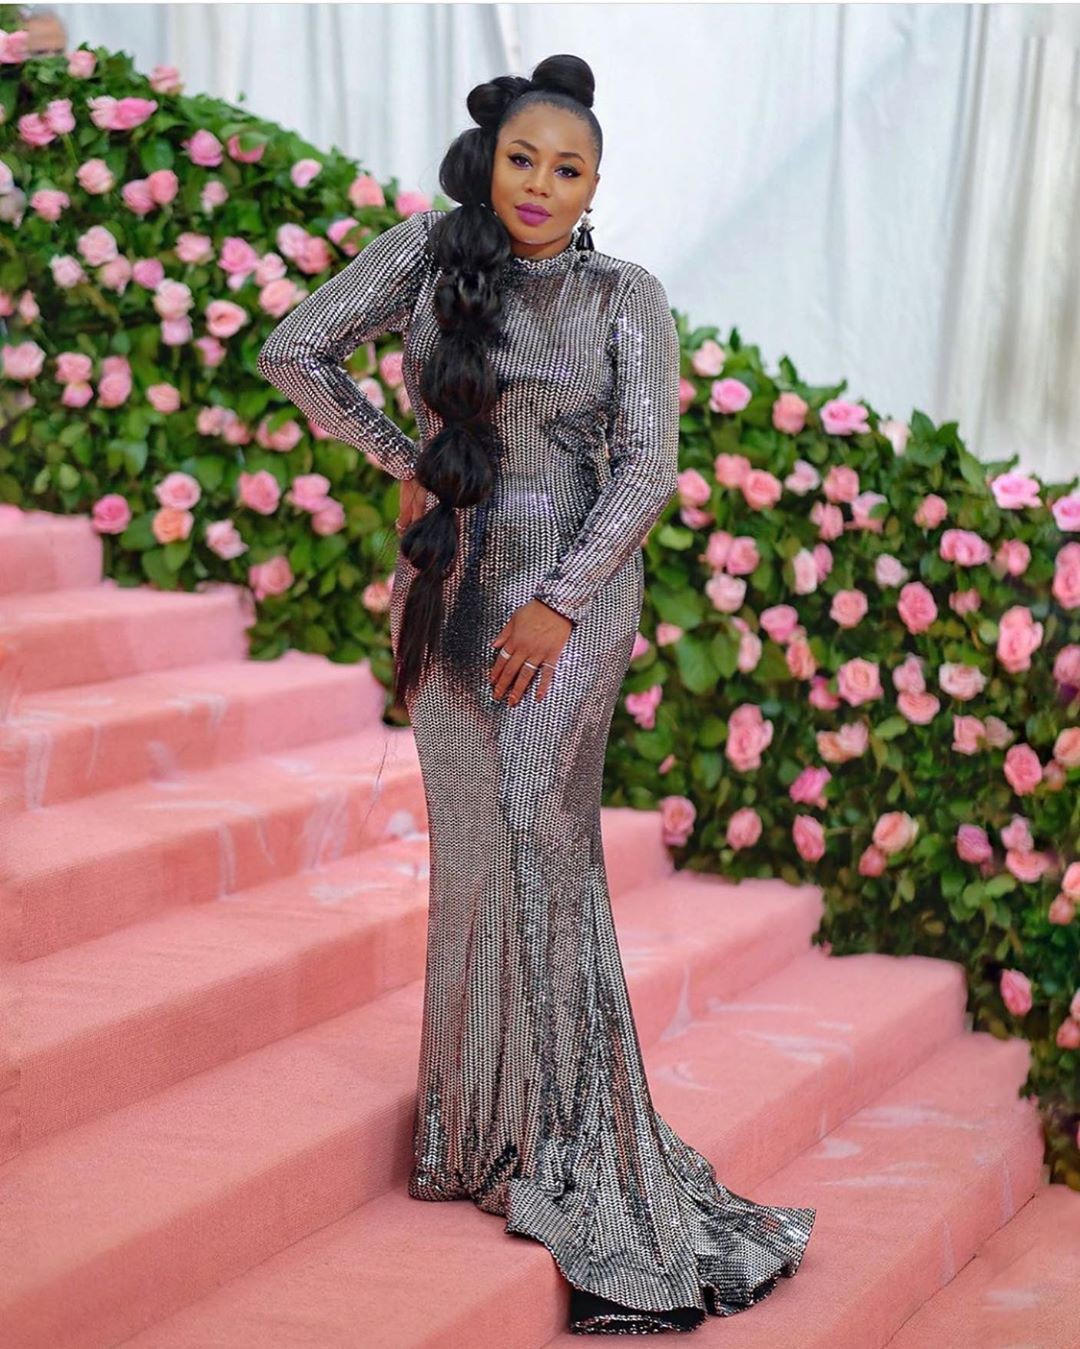 Kela Walker in Jovani at the MET Gala 2019 Red Carpet: Celebrity Outfits,  Red Carpet Dresses,  Red Carpet Hairstyle,  Award Functions,  Beautiful Celebs Pics  